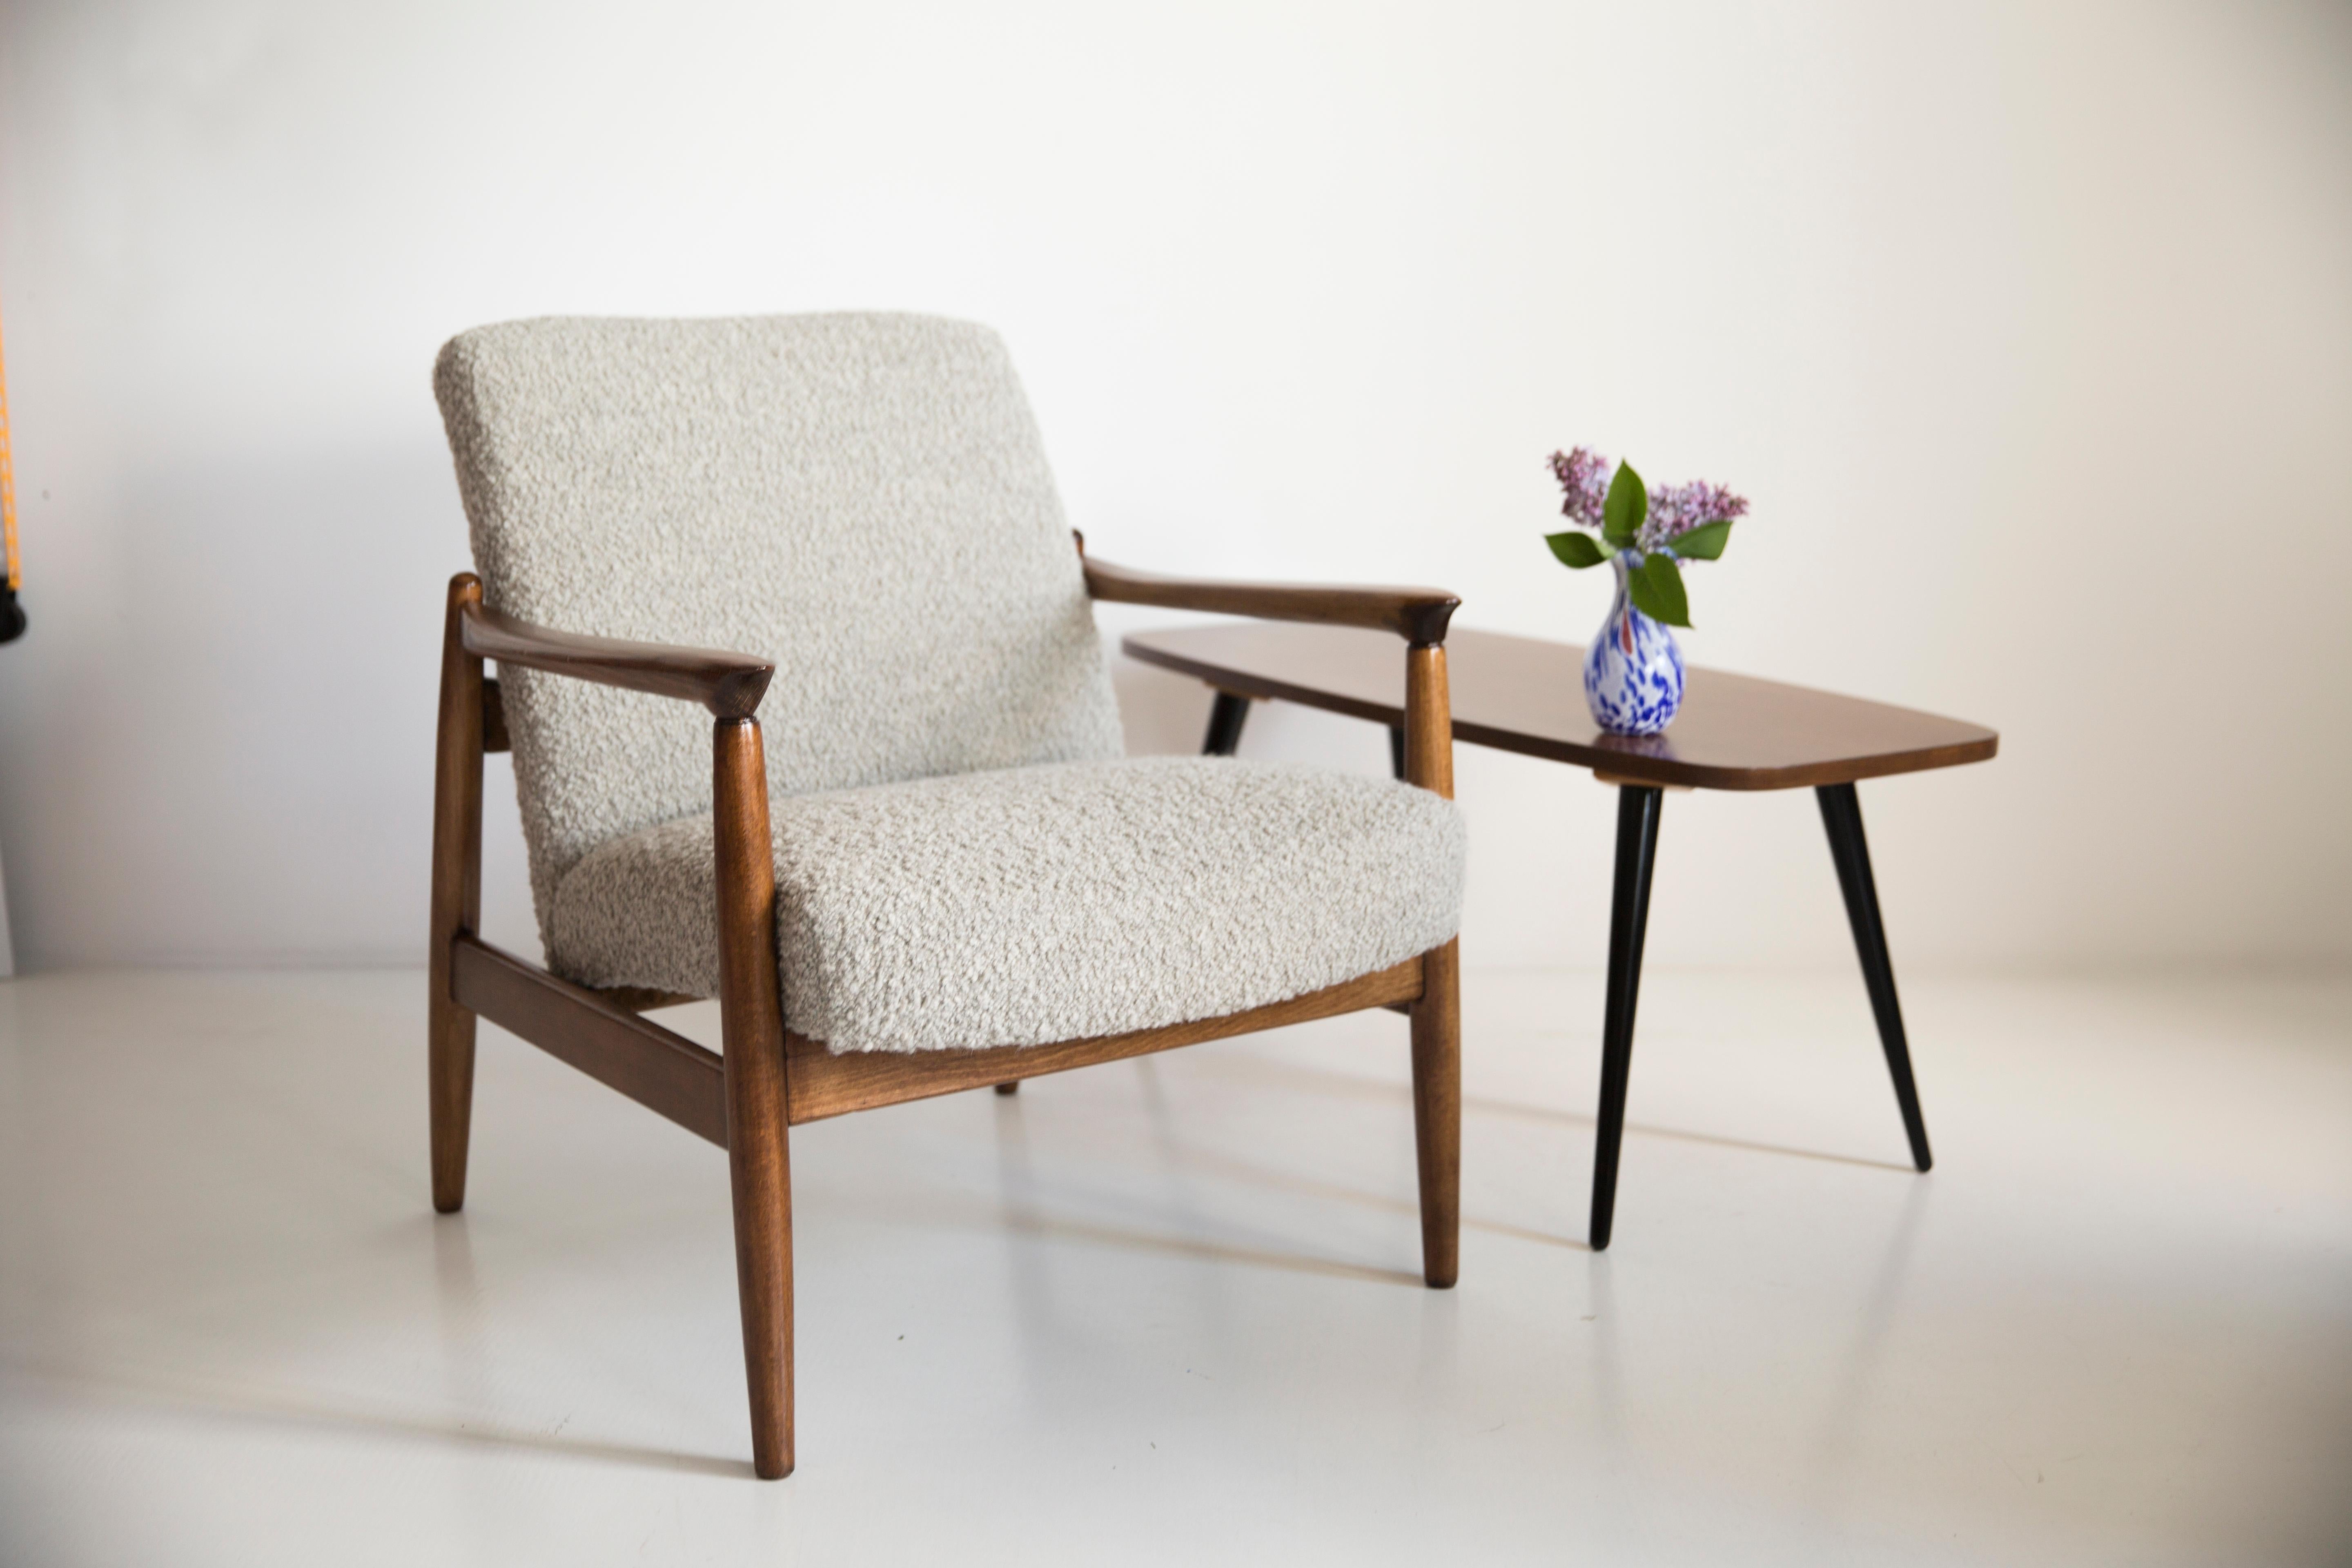 Unique alpaca wool armchair, designed by Edmund Homa. The armchair was made in the 1960s in the Gosciecinska Furniture Factory from solid beechwood. The GFM type armchair is regarded one of the best Polish armchair design from the previous age. The